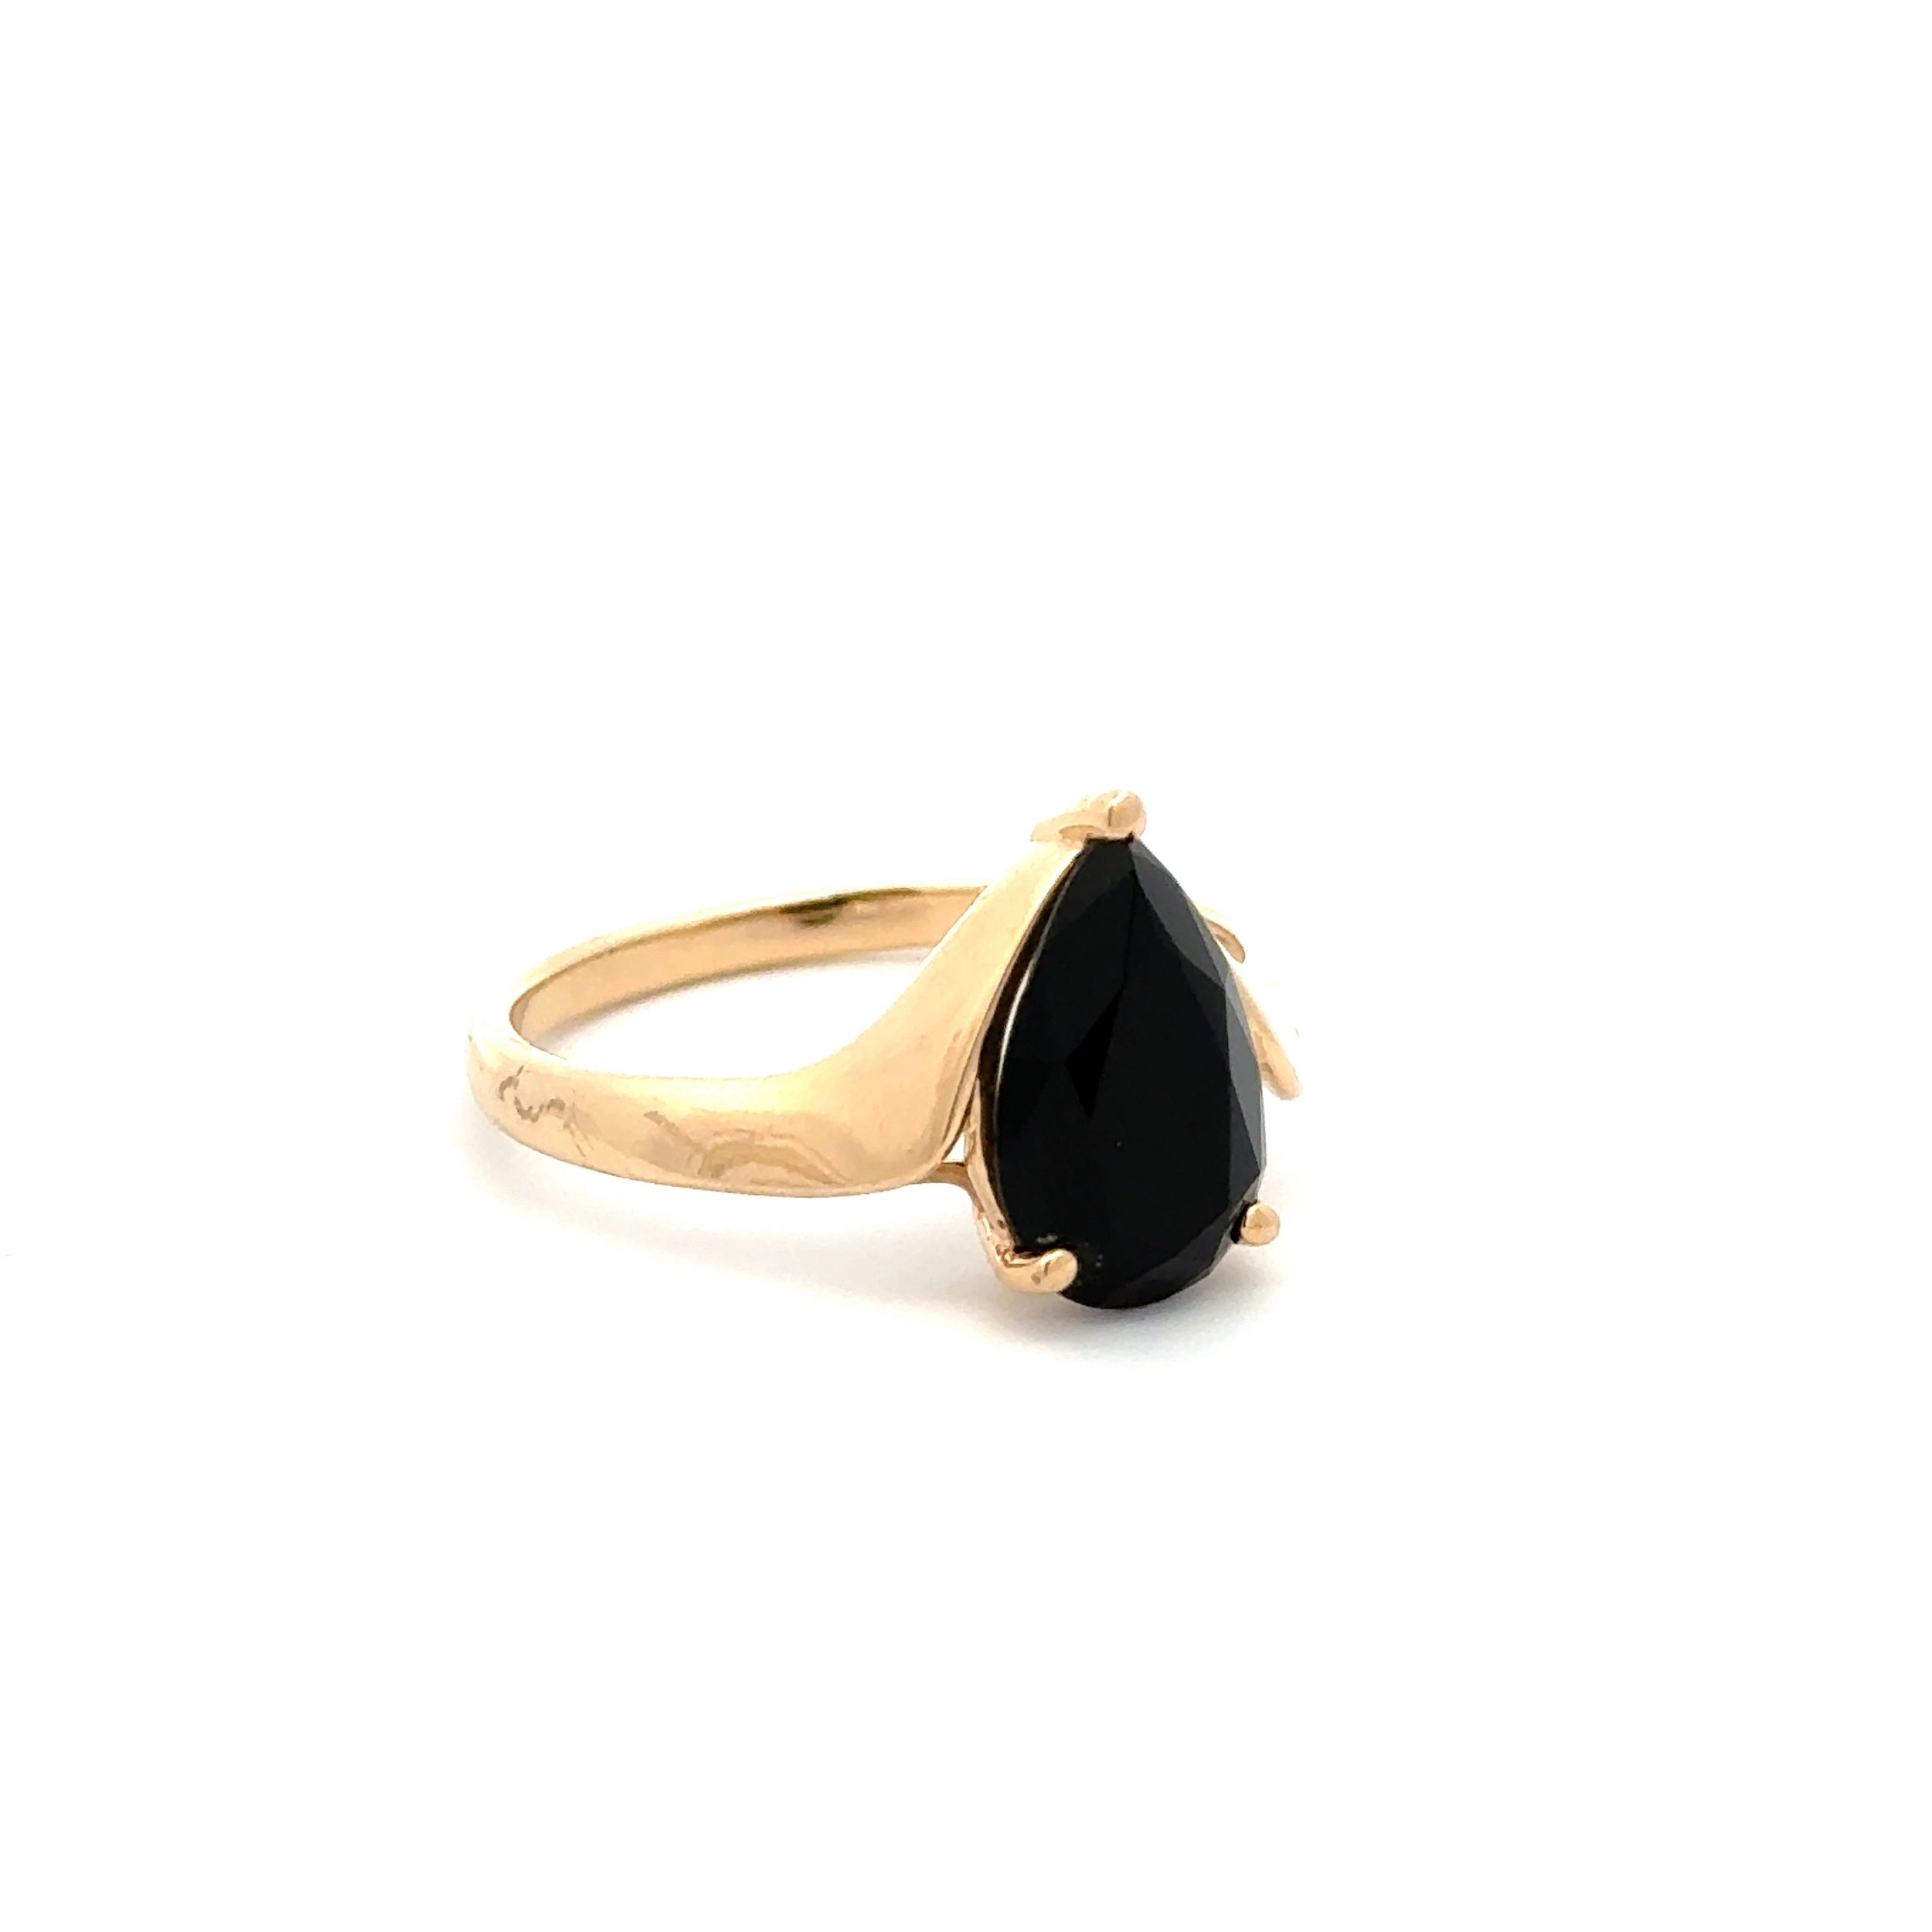 14K YG 2.5ct Pear Black Onyx Solitaire Tapered Shank Ring 3.4g, s10